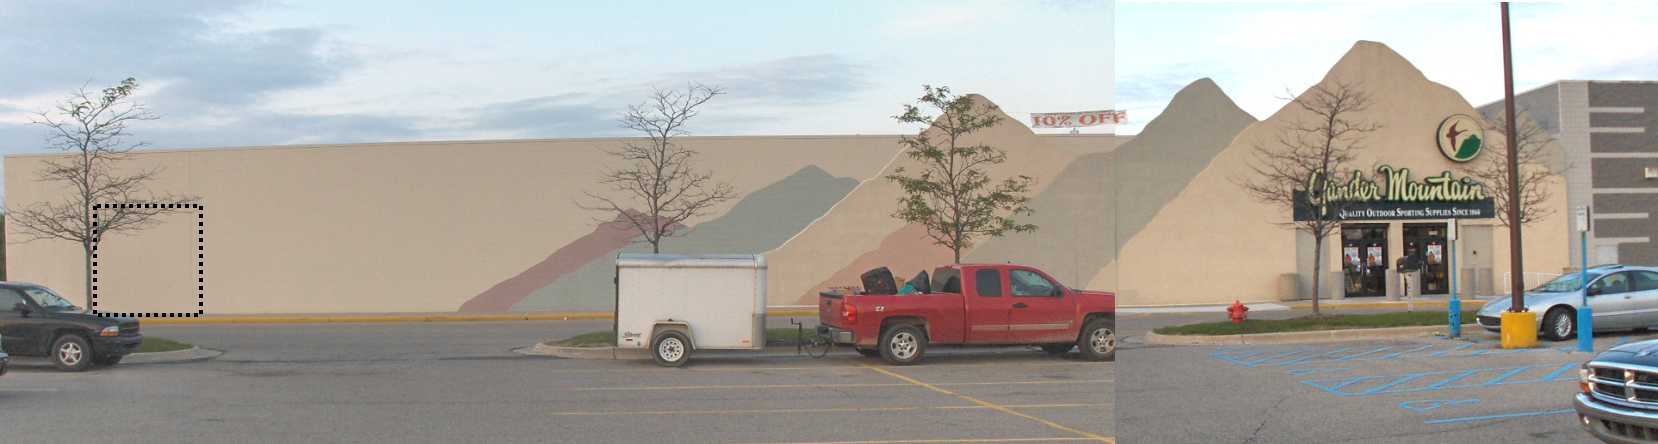 Gander-Mountain-Store-Summit-Mall-Waterford-Michigan-Door-Addition-Project-Picture-1